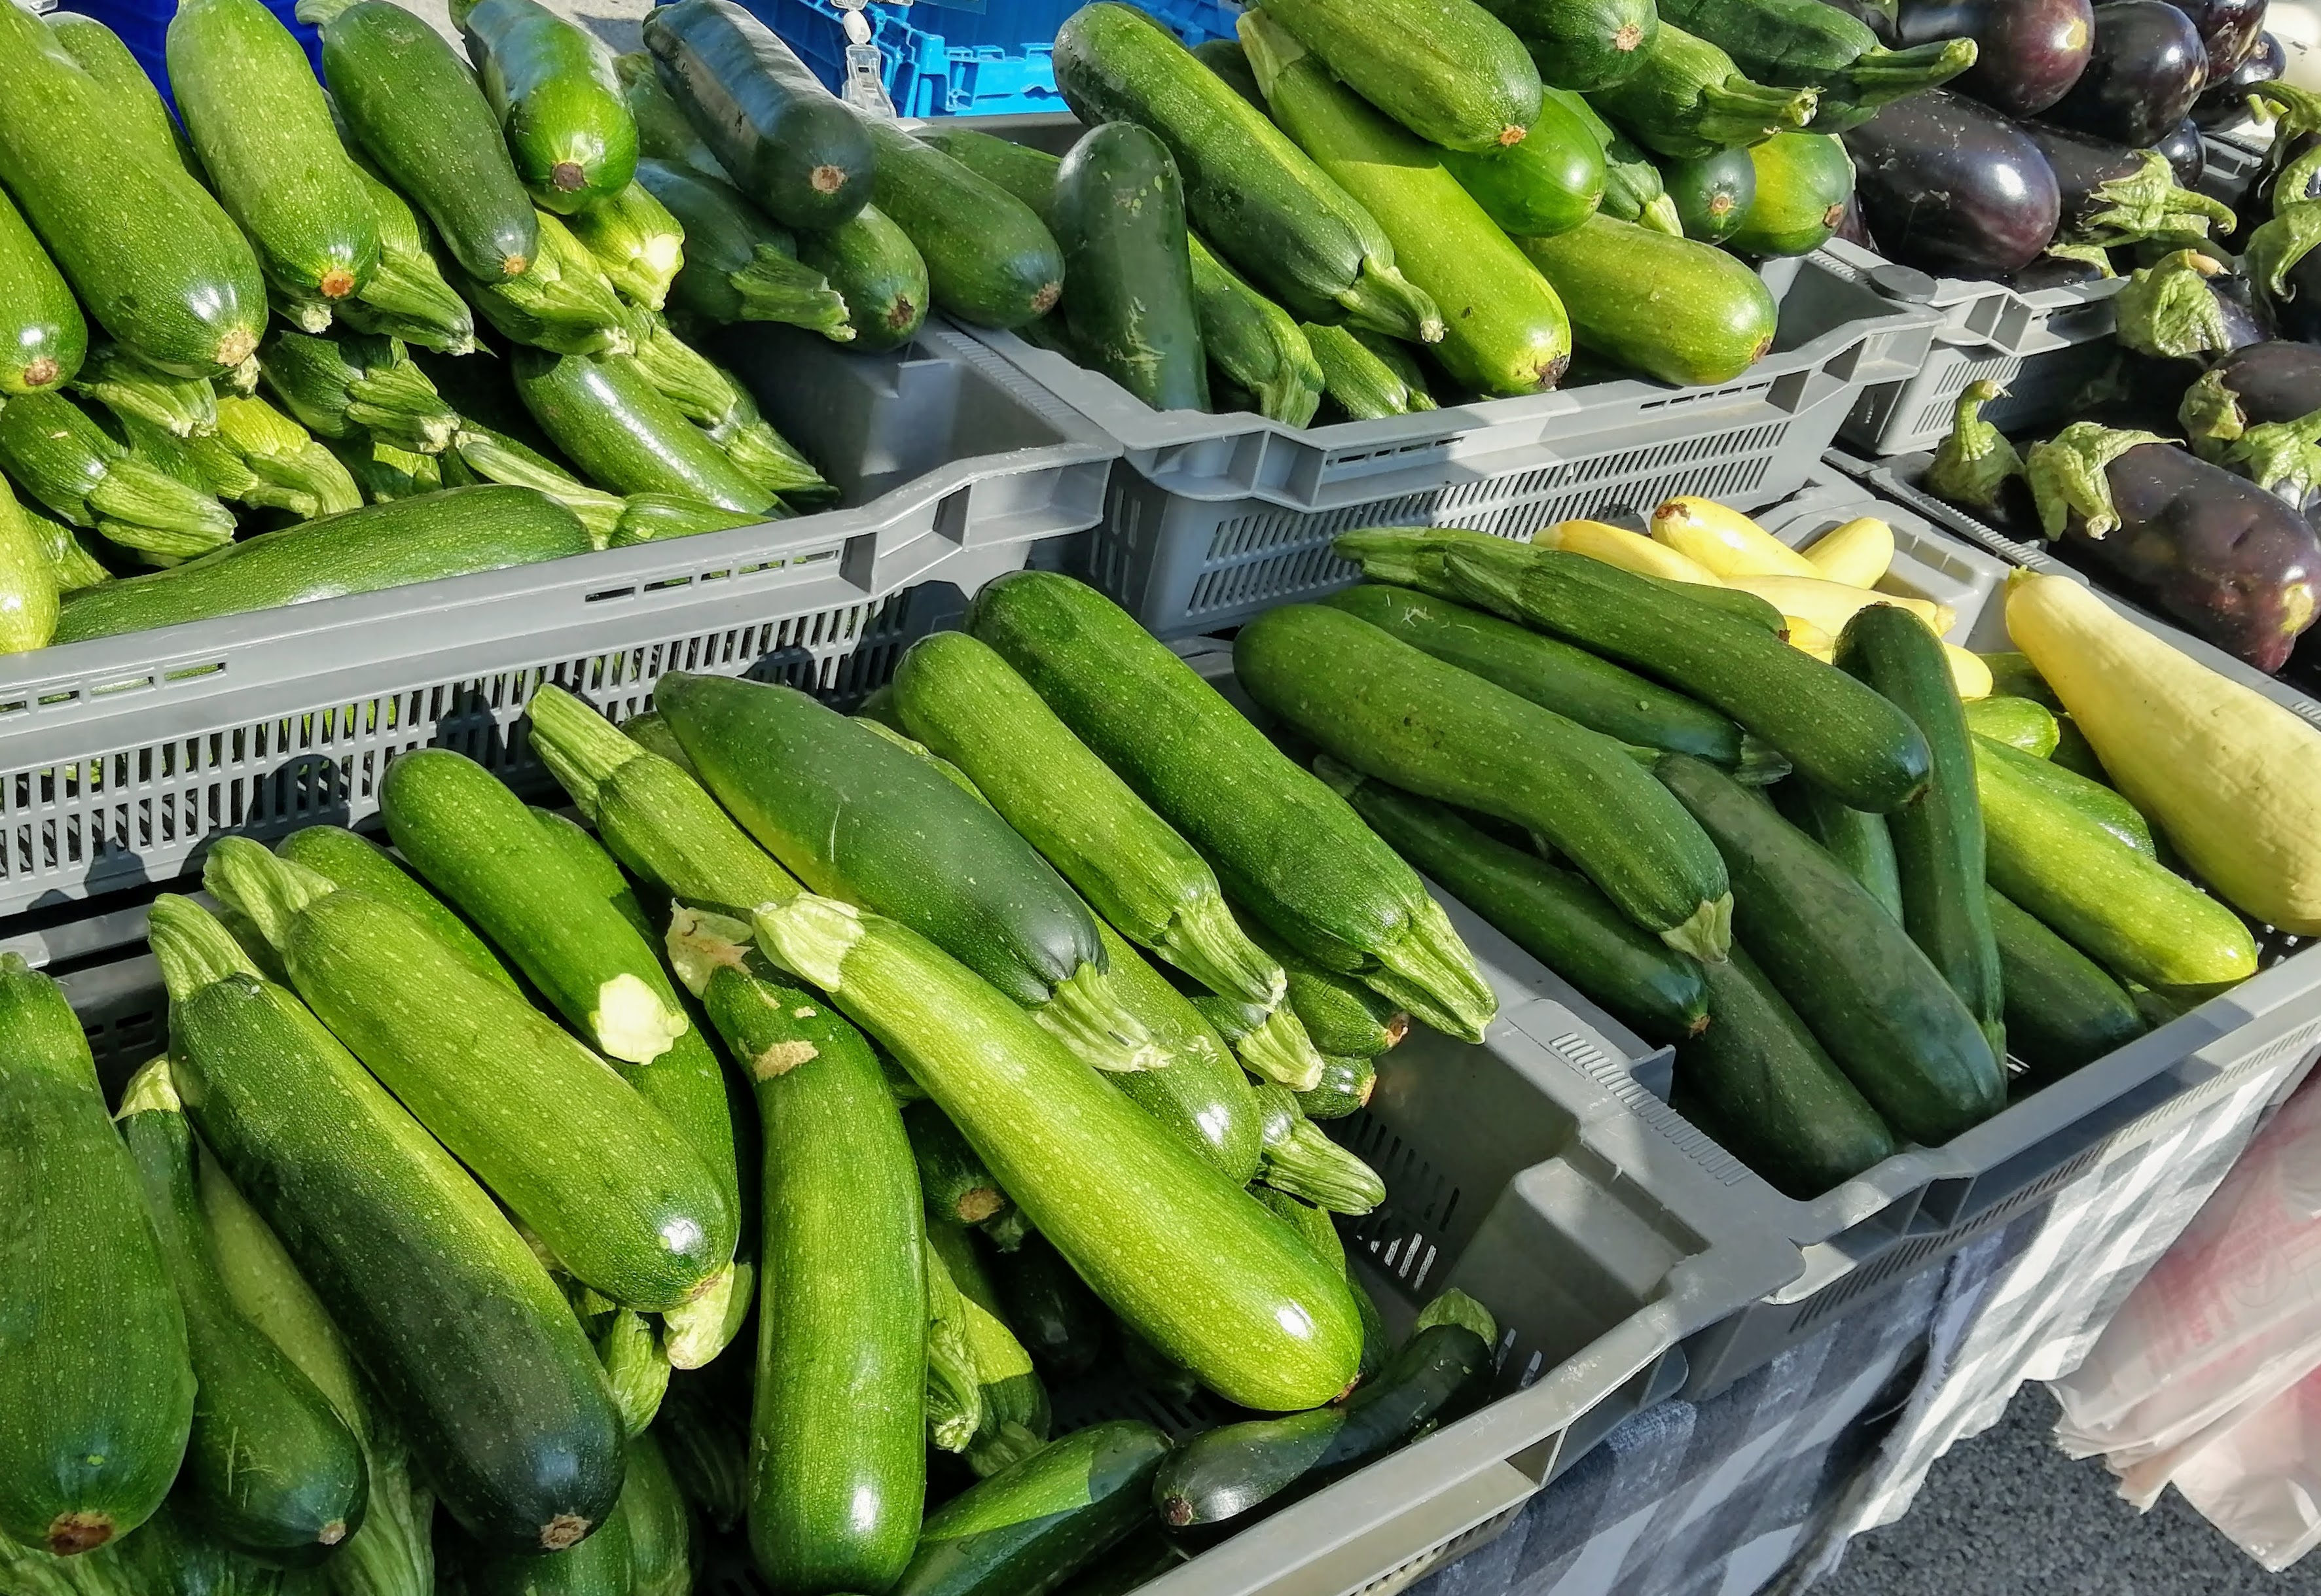 A display of green zucchinis and yellow squash for sale. Photo by Paul Young.